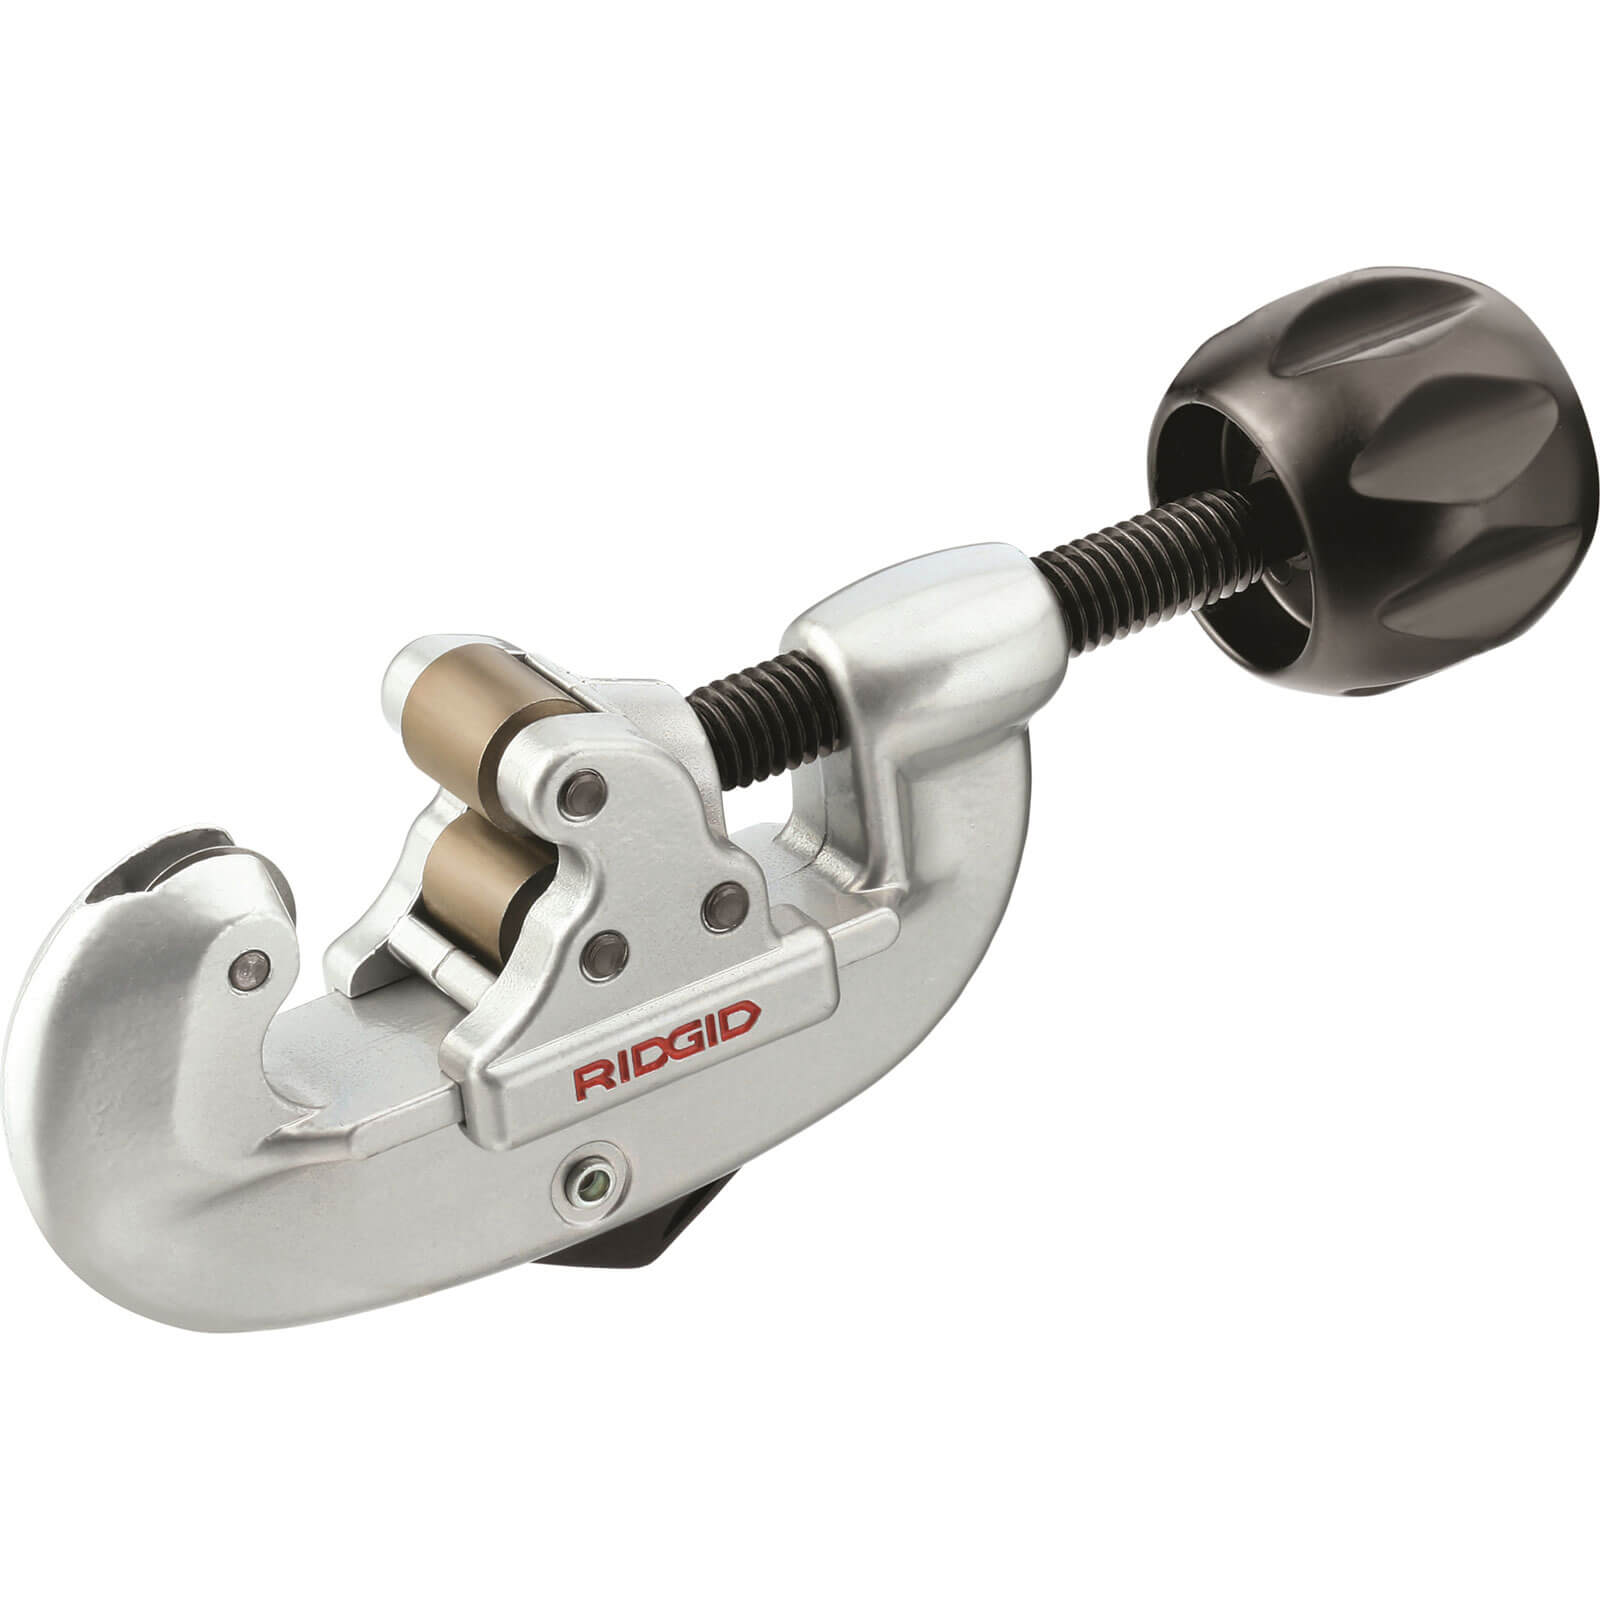 Image of Ridgid Adjustable Pipe Cutter for Stainless Steel Tubing and Conduits 5mm - 28mm